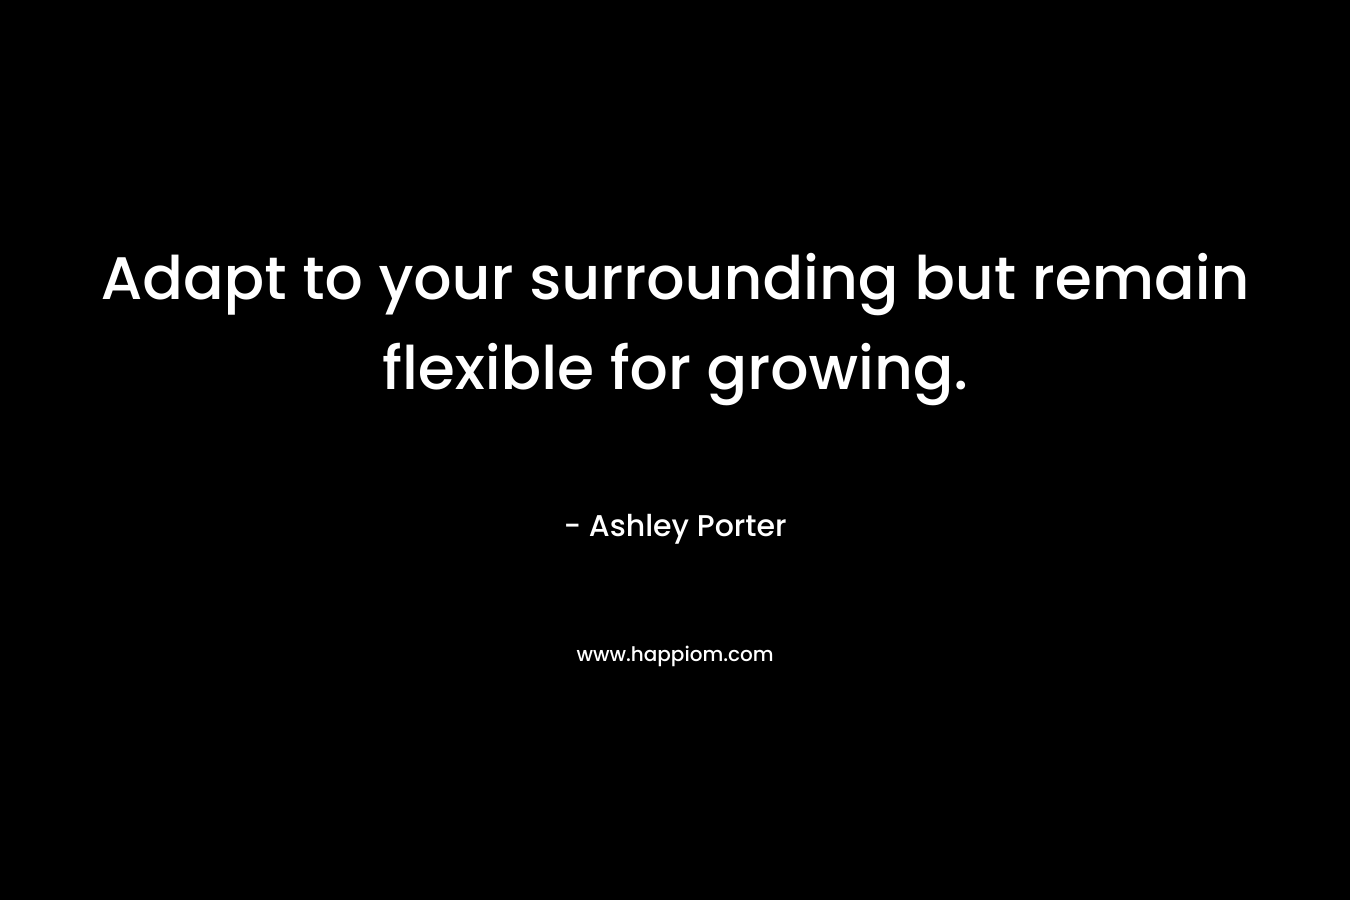 Adapt to your surrounding but remain flexible for growing. – Ashley Porter